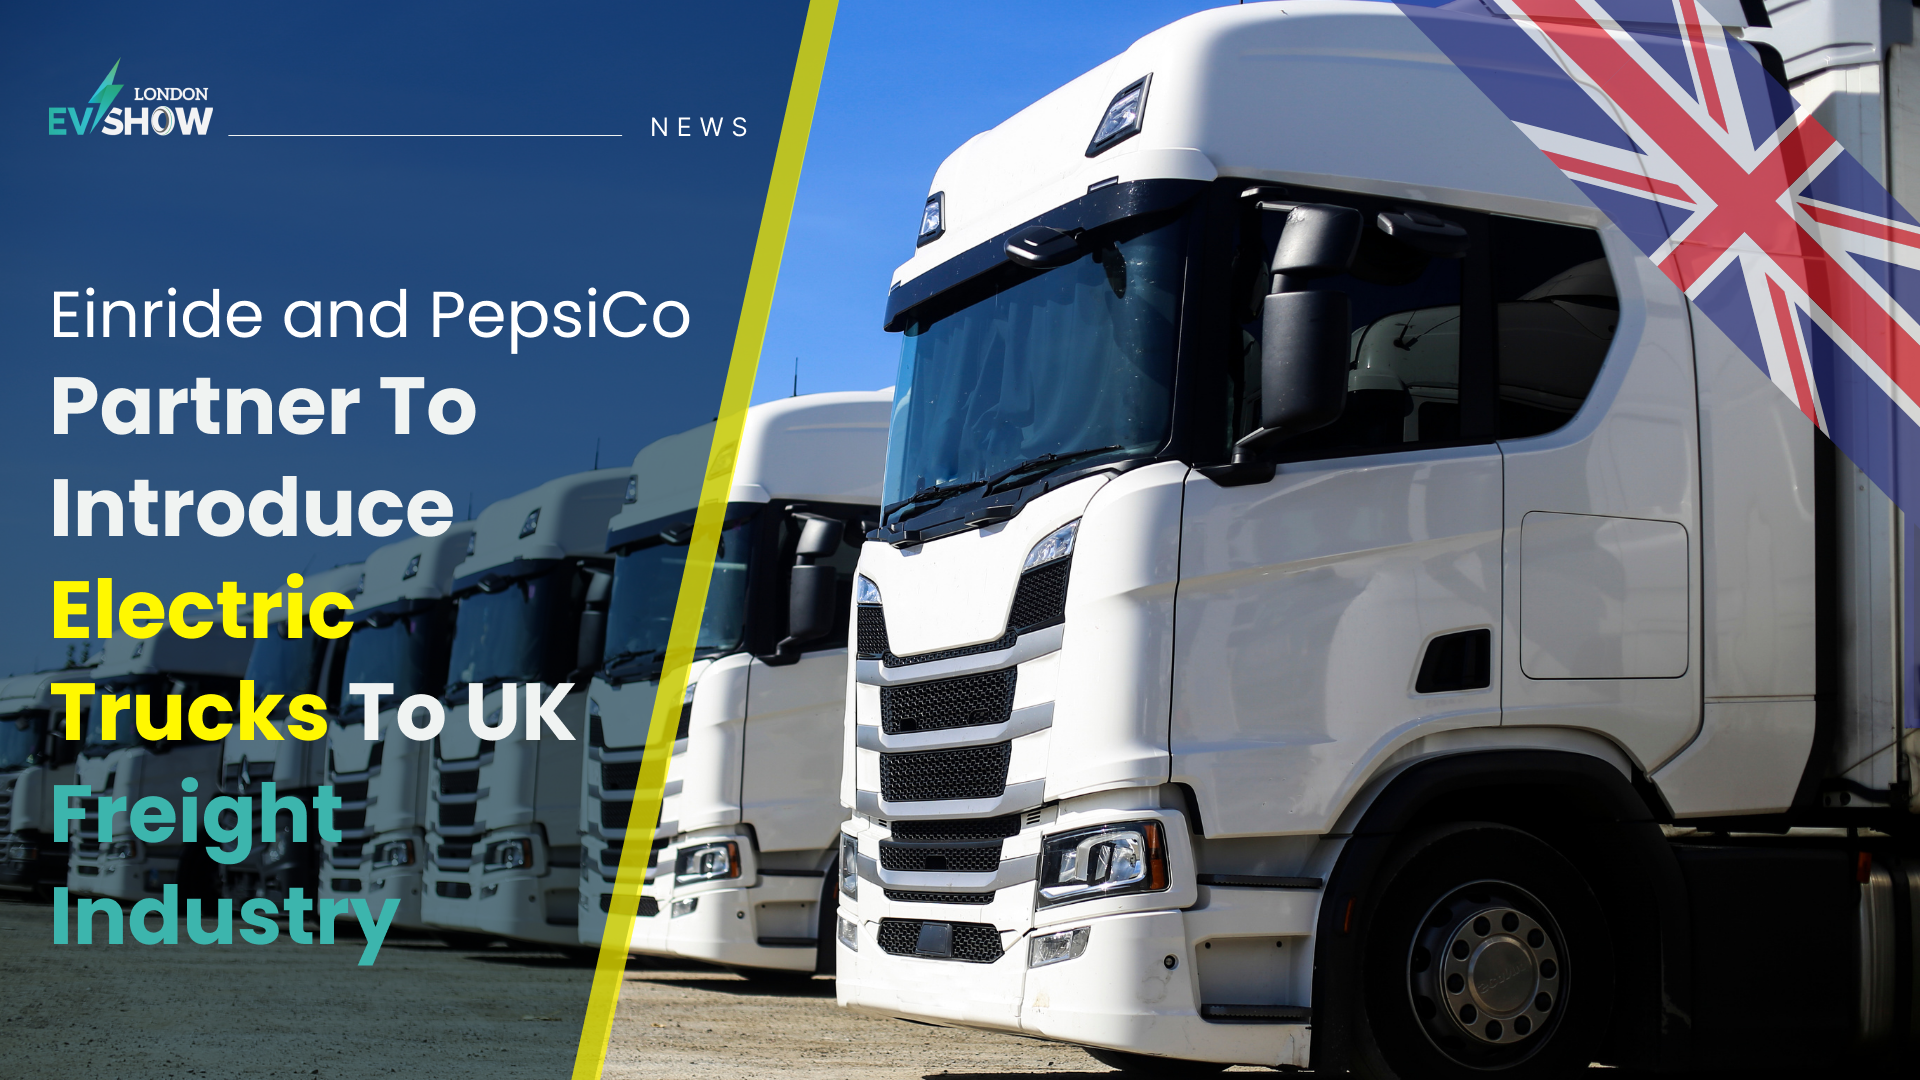 Einride and PepsiCo Partner To Introduce Electric Trucks To UK Freight Industry